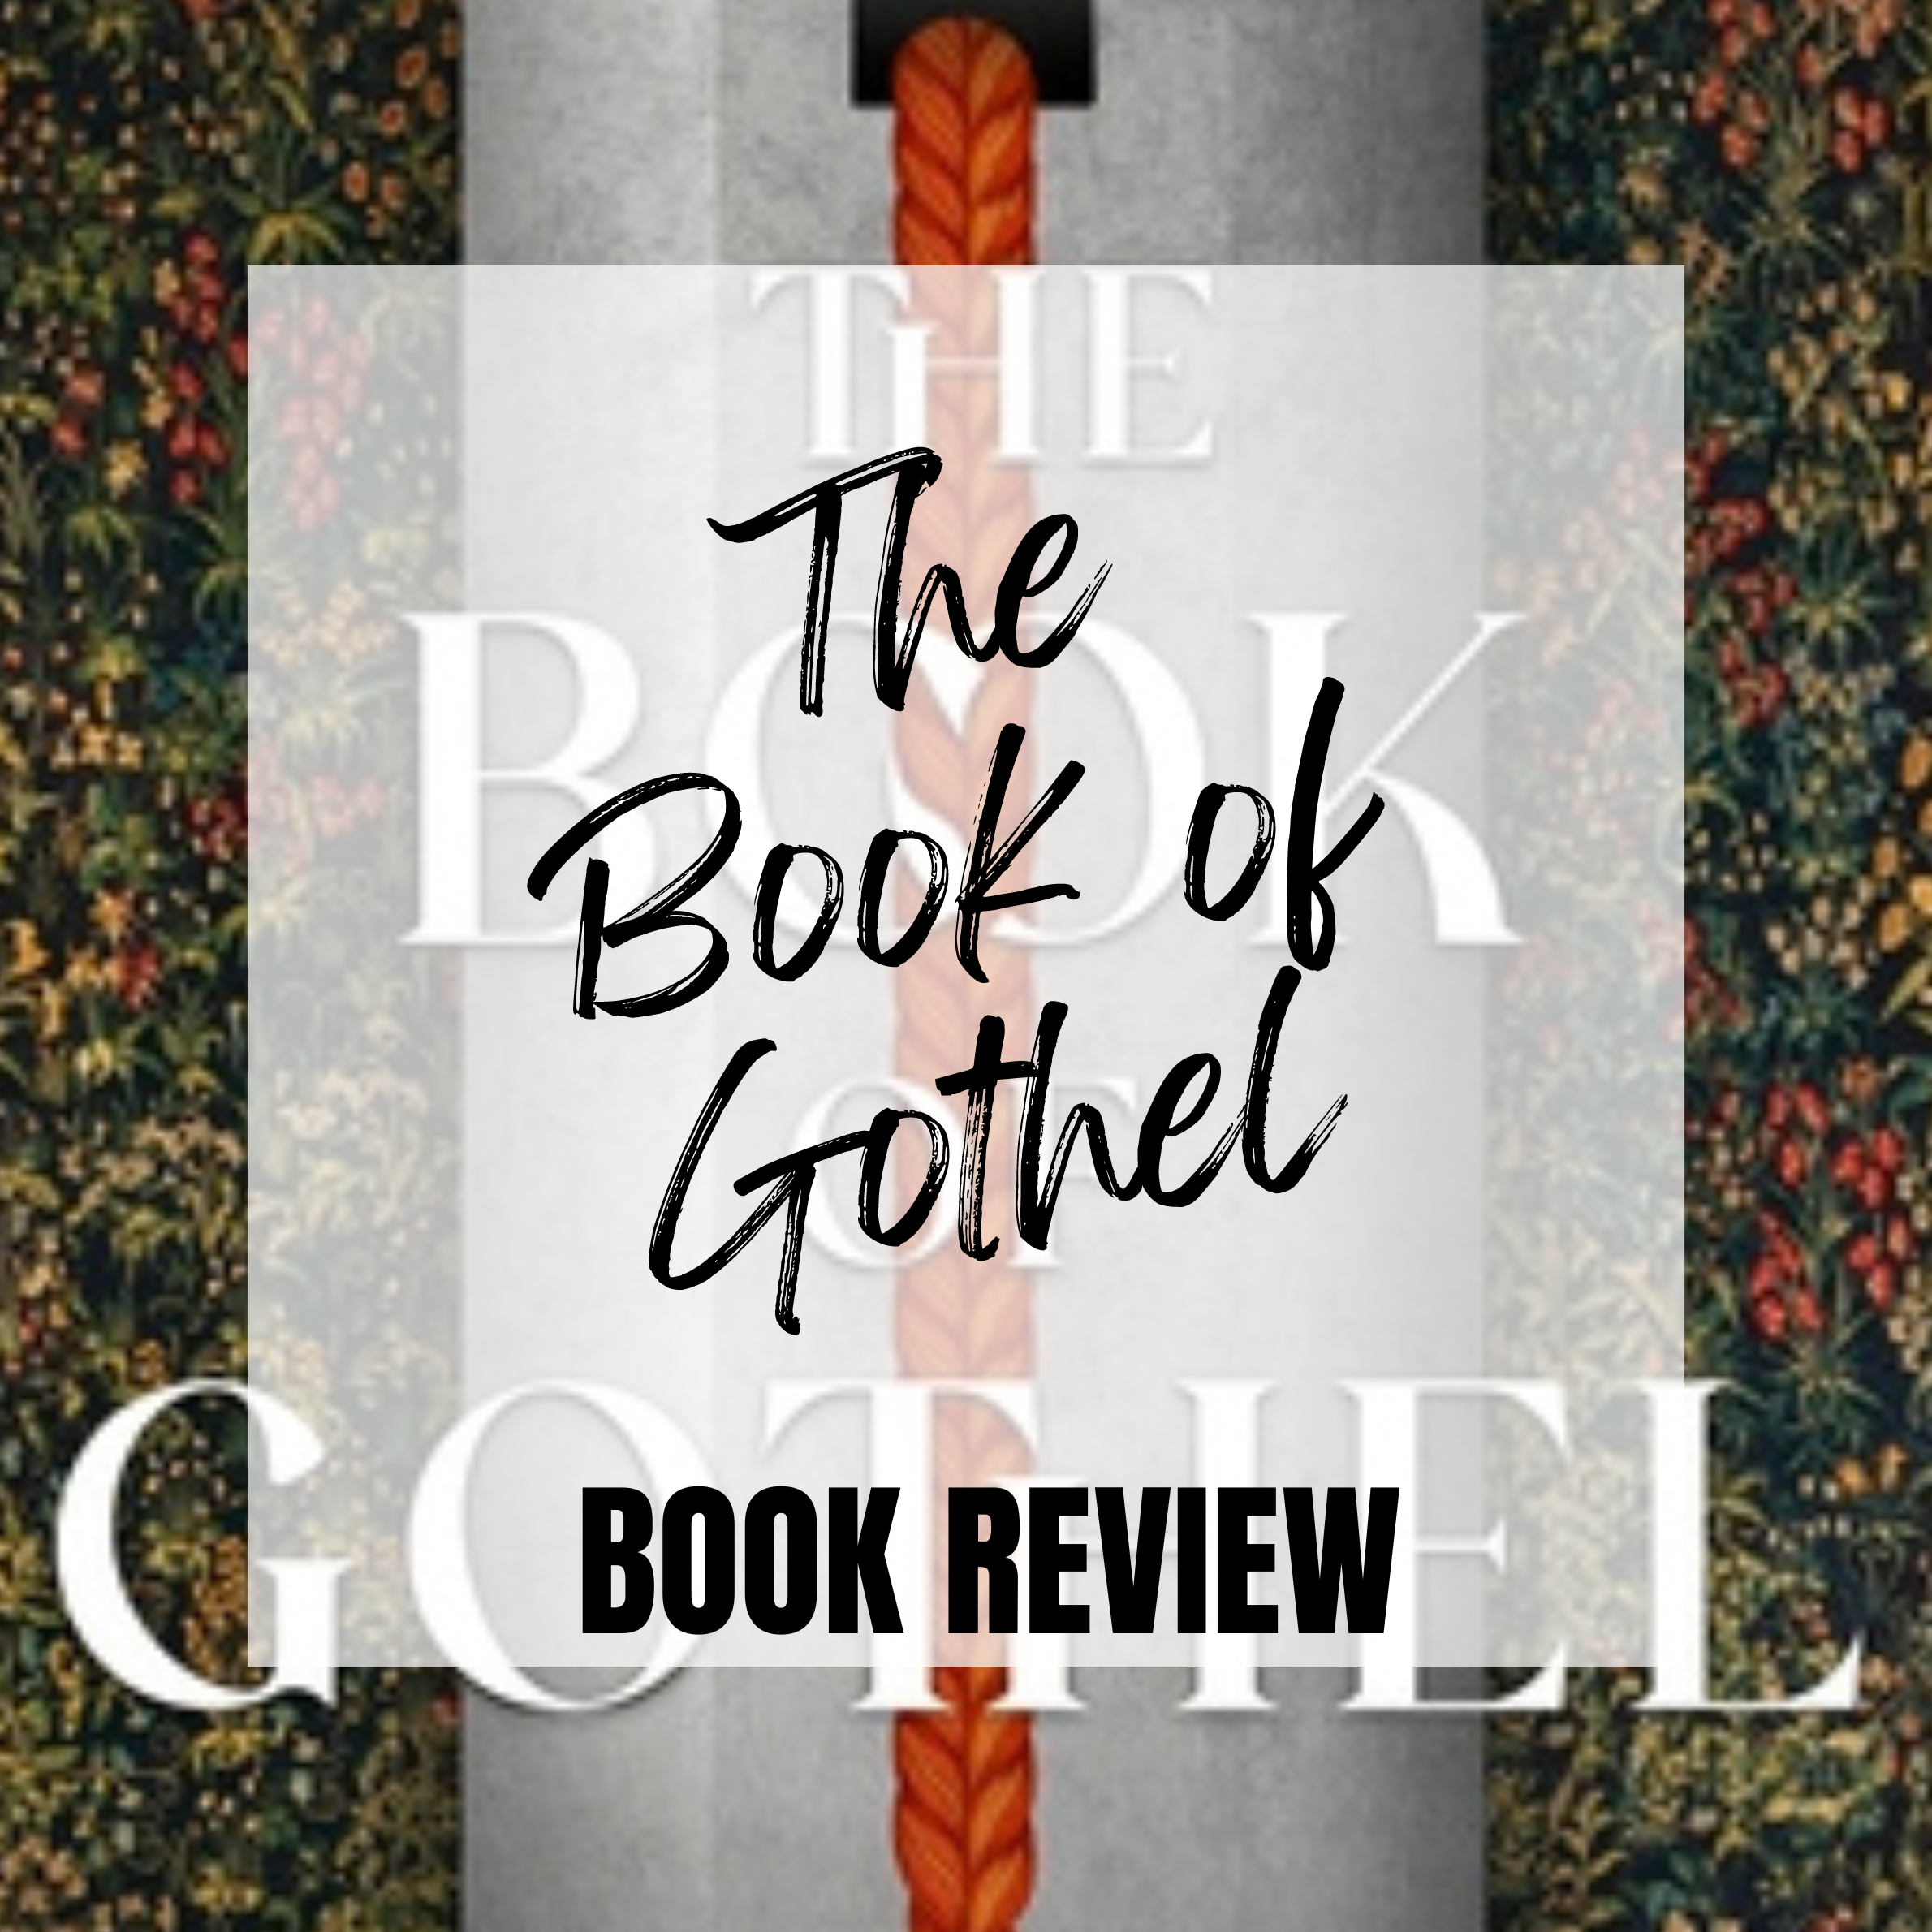 The Book of Gothel by Mary McMyne–ATLP Book Review